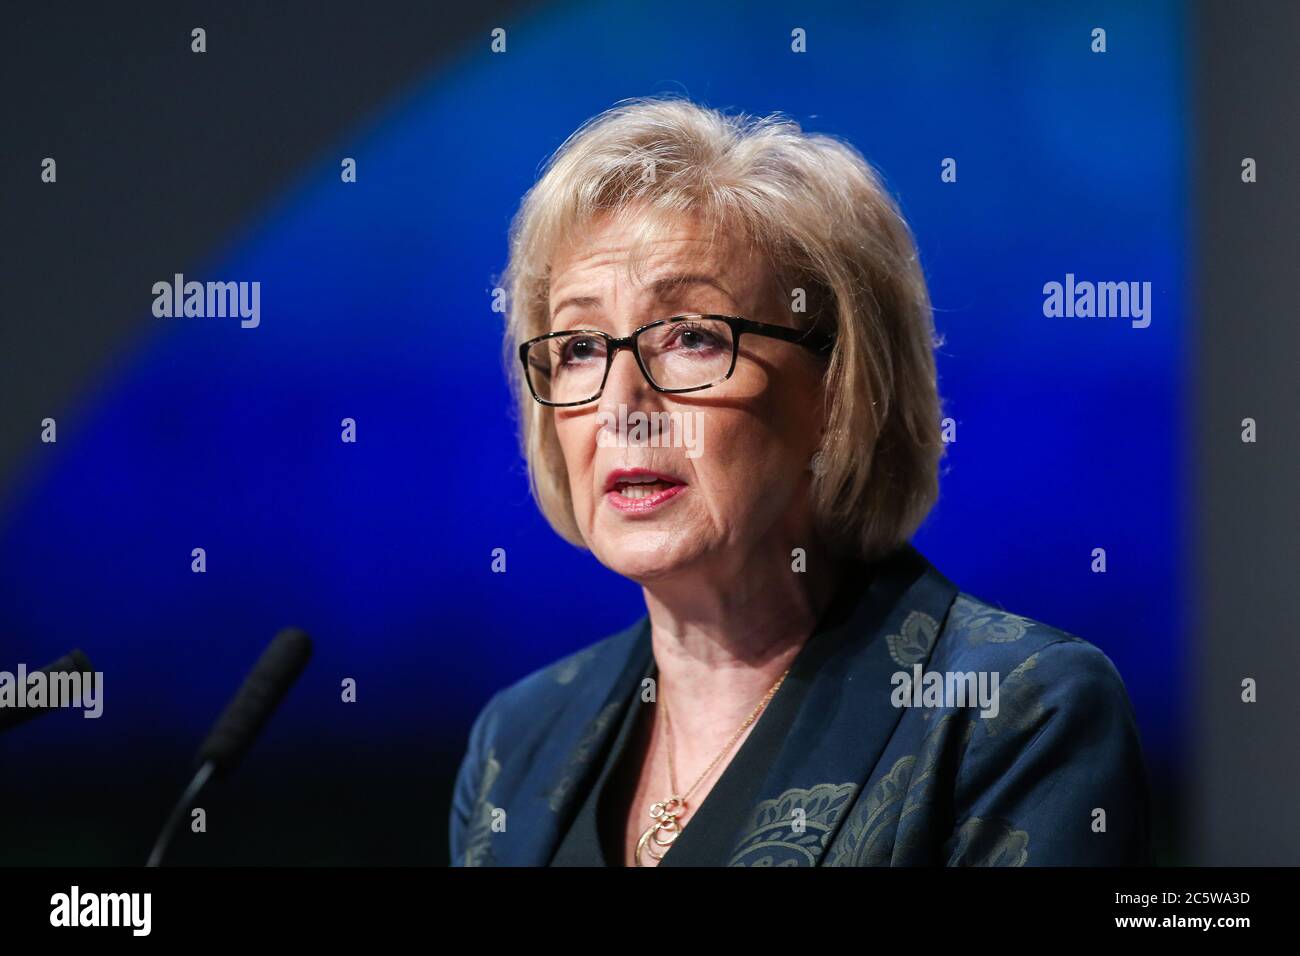 Secretary of State for DEFRA Andrea Leadsom speaking at the 2017 NFU Conference at the ICC in Birmingham, West Midlands, UK. Stock Photo